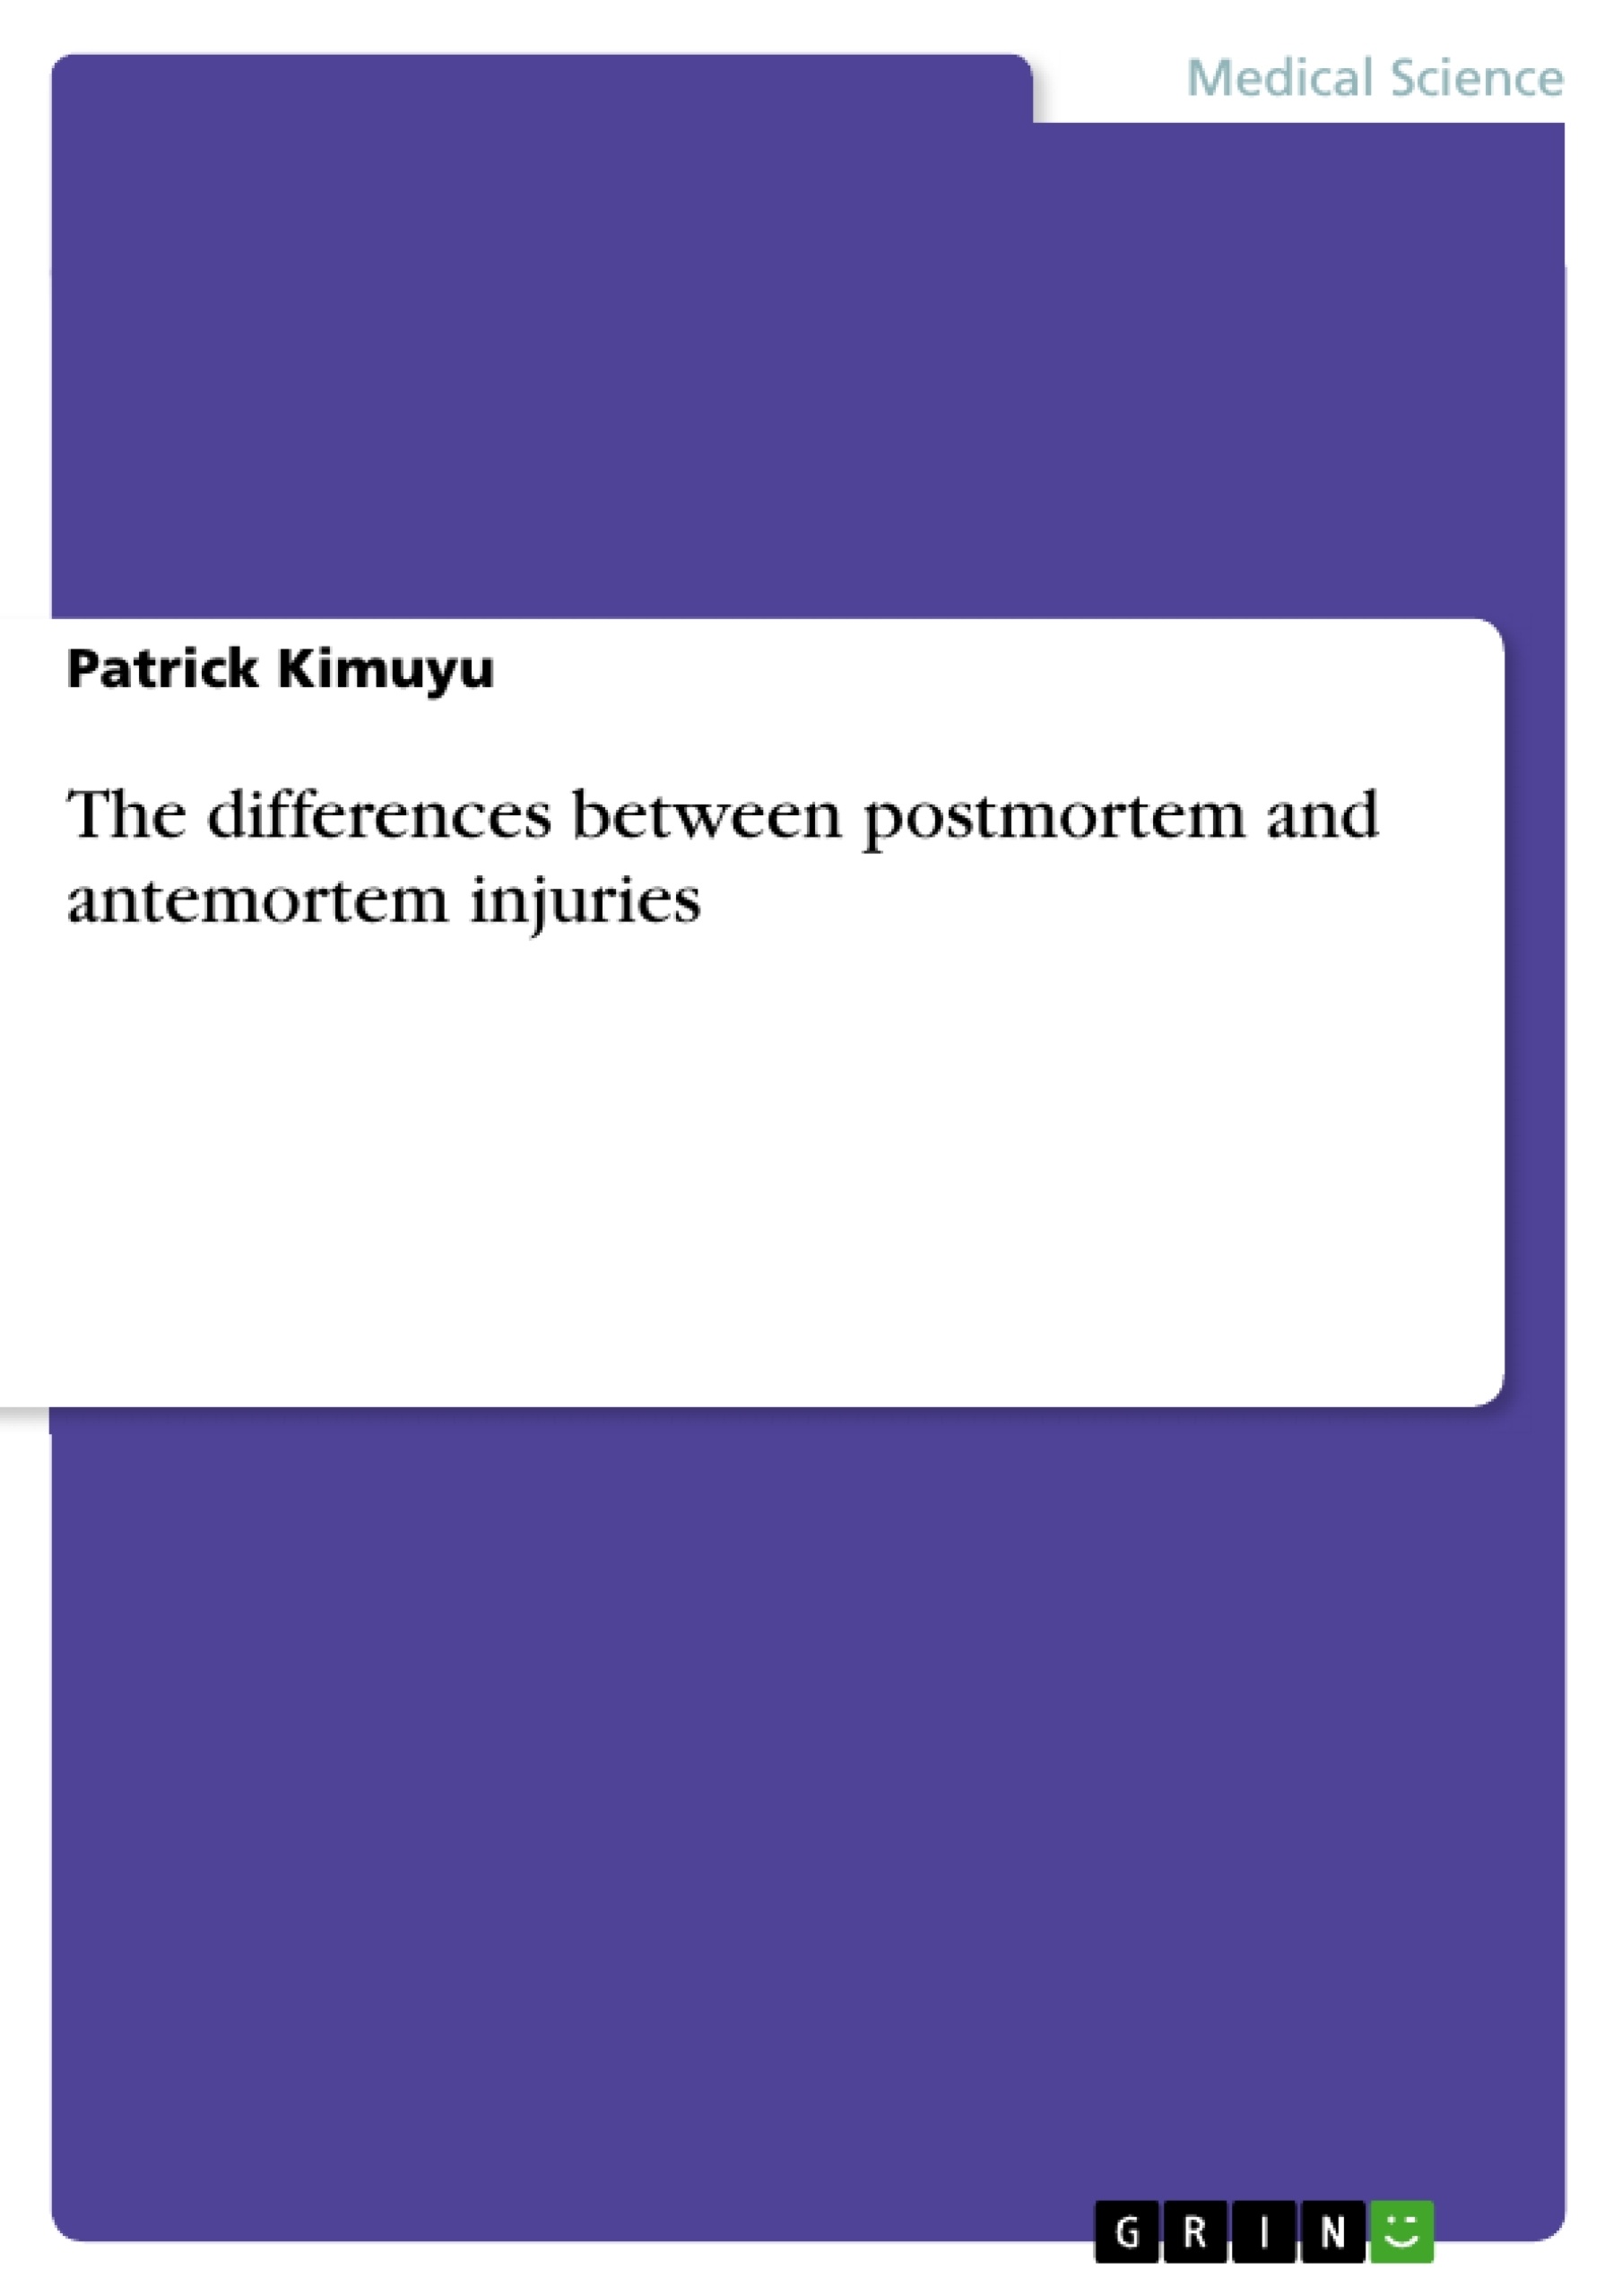 Title: The differences between postmortem and antemortem injuries